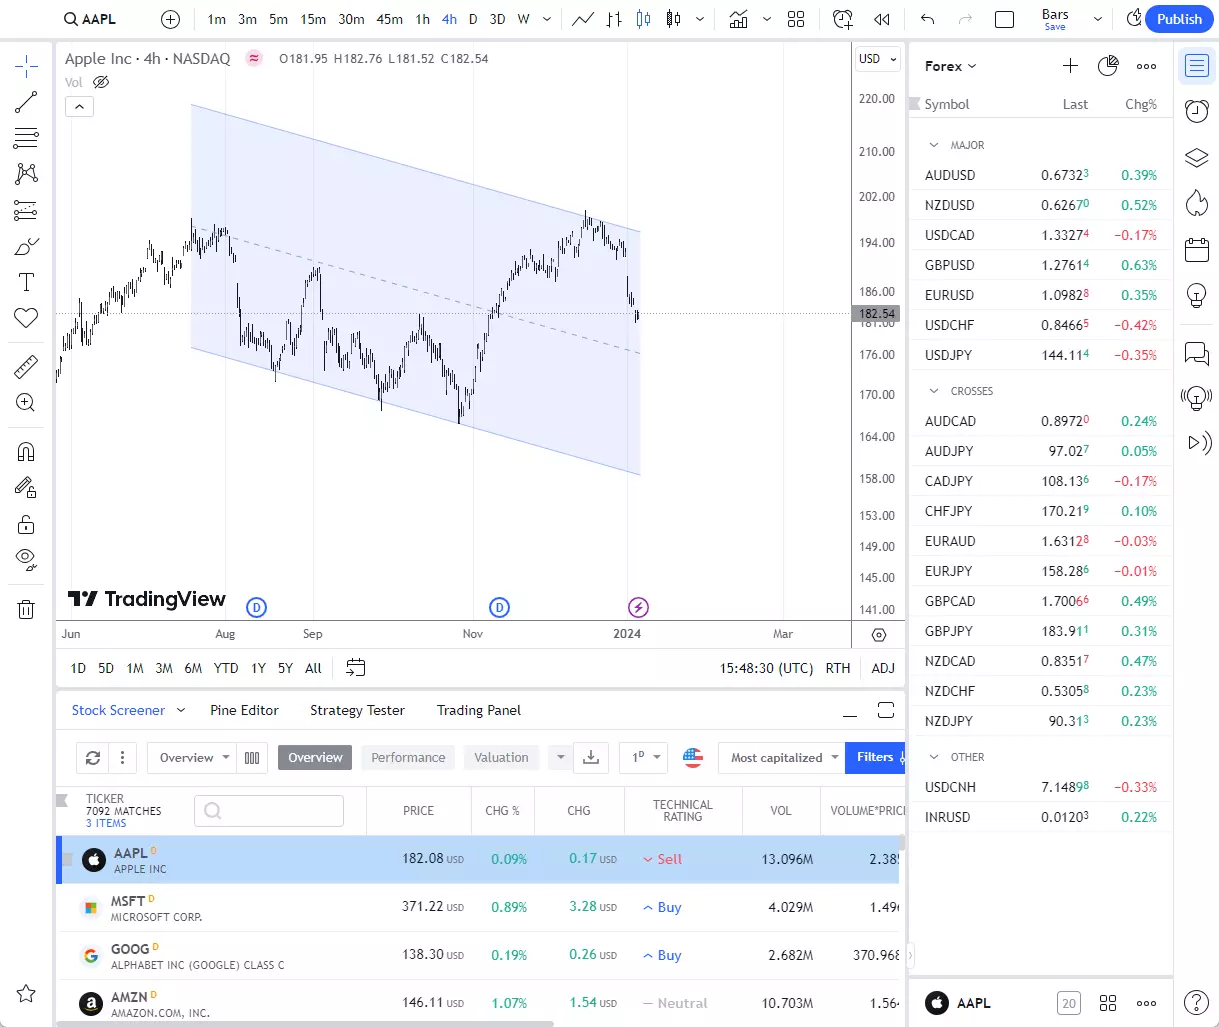 This is how the TradingView platform looks like